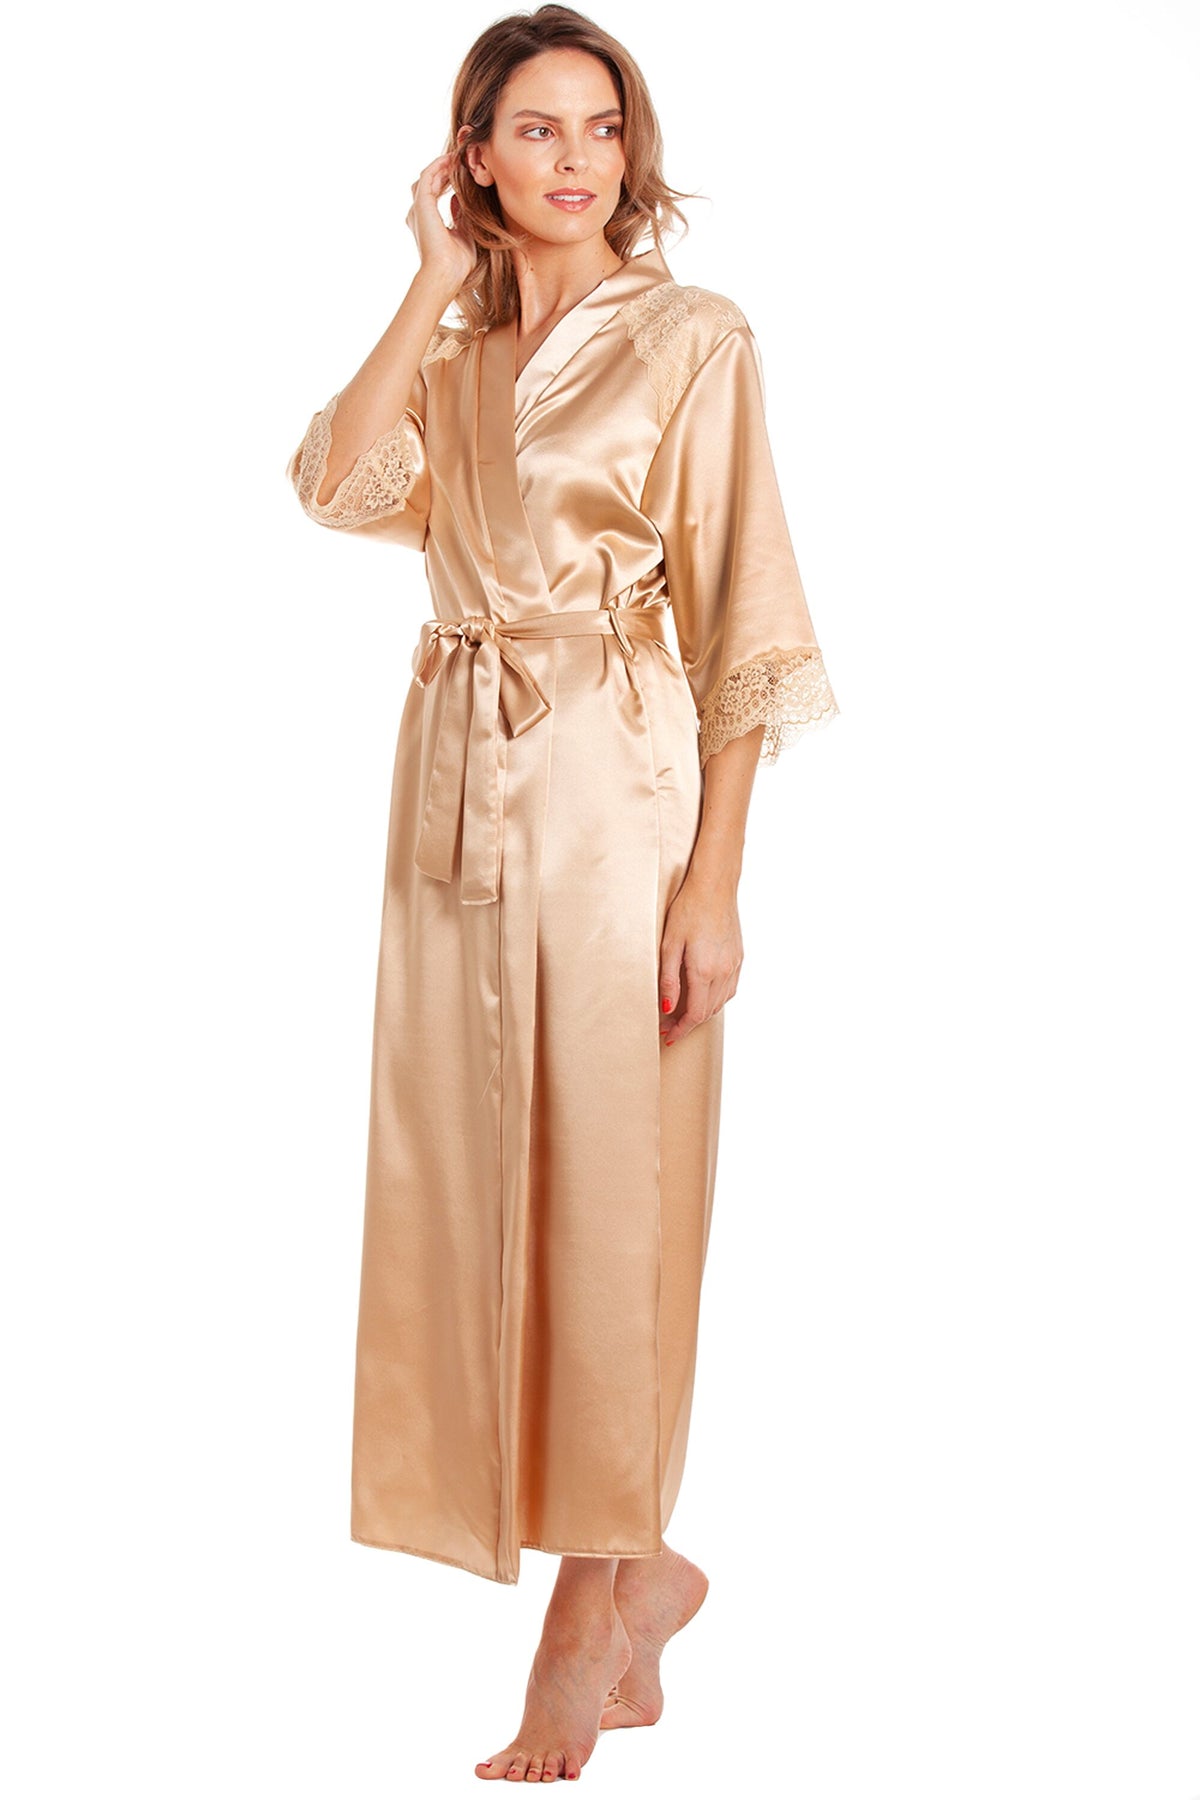 Very long, ankle-length satin dressing gown with long, flared sleeves